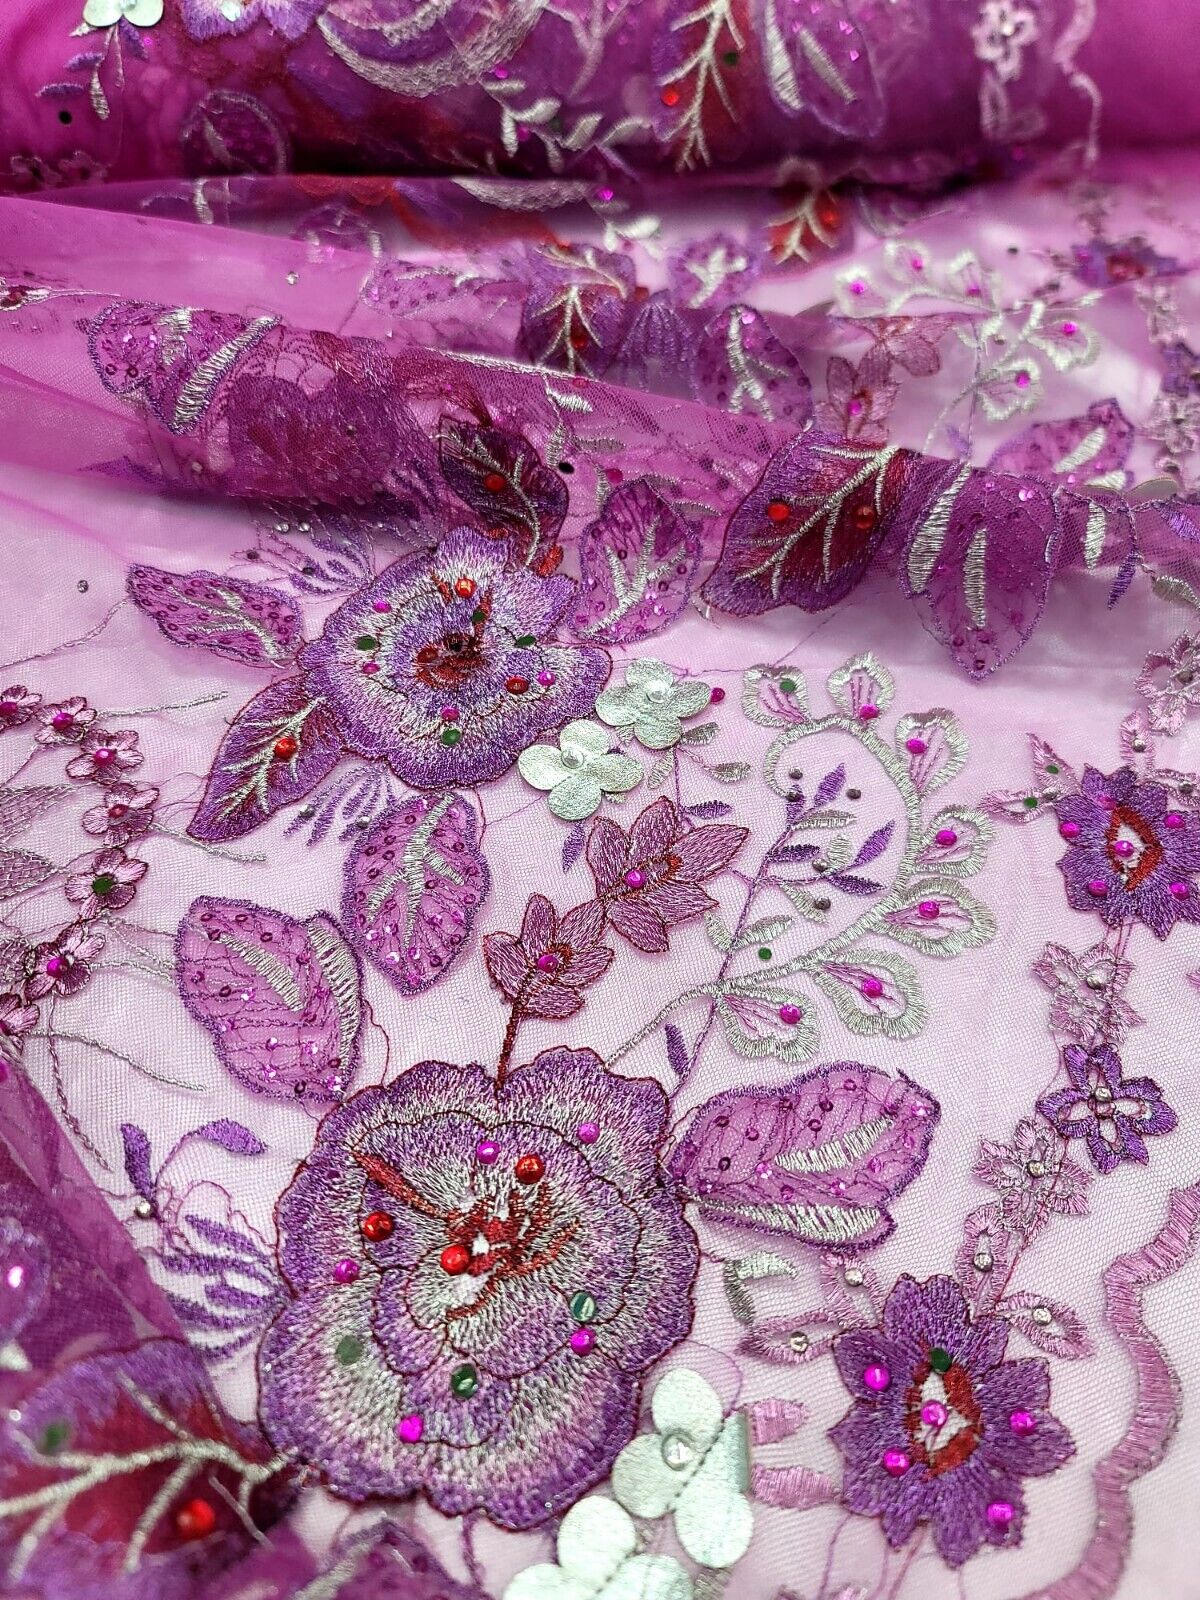 Purple Lace Fabric by the Yard - Floral 3D Silver Flower Embroidered with Glued Rhinestones